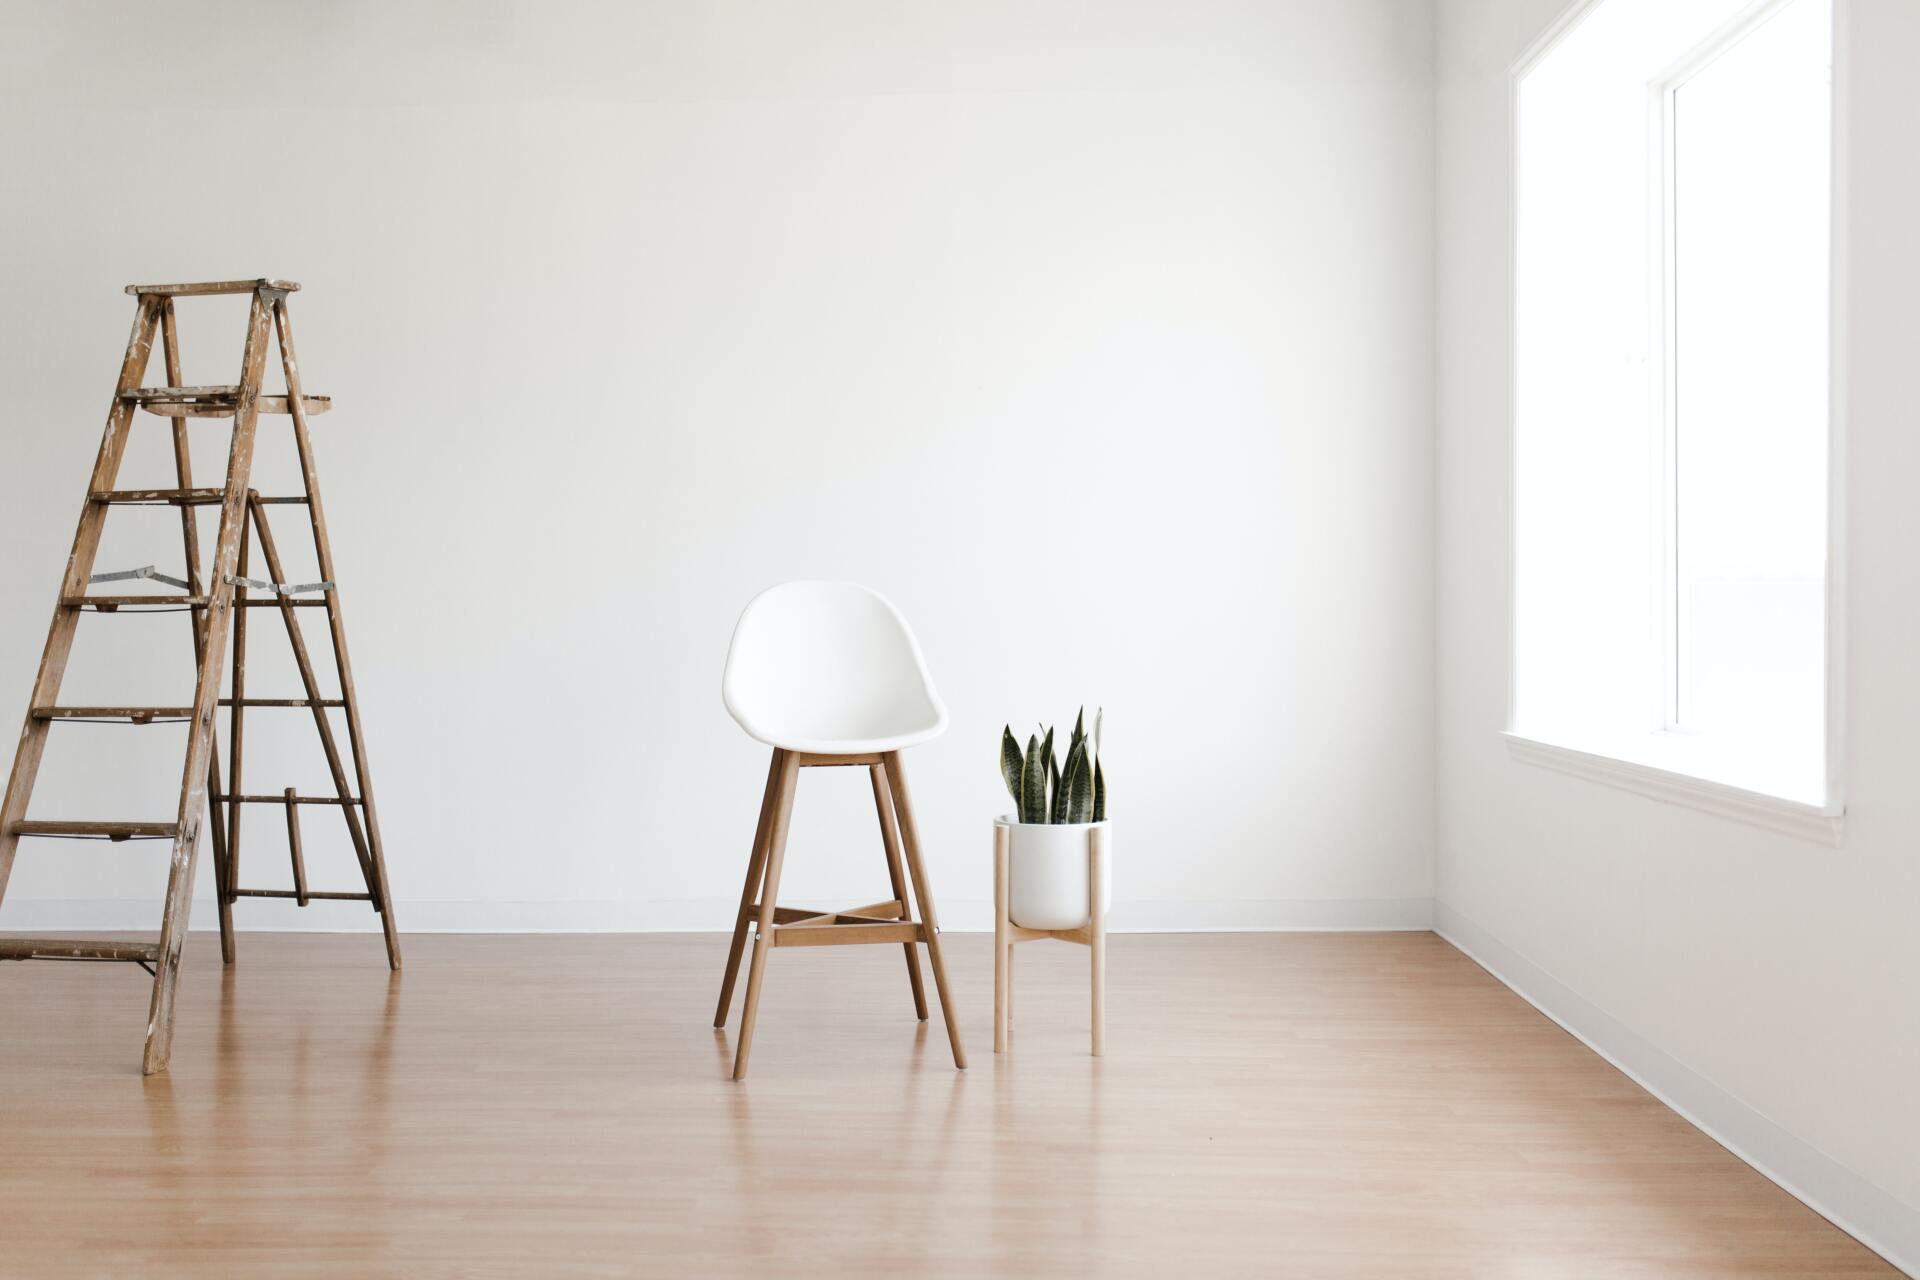 A chair, ladder, and plant placed on a sleek Hardwood floor